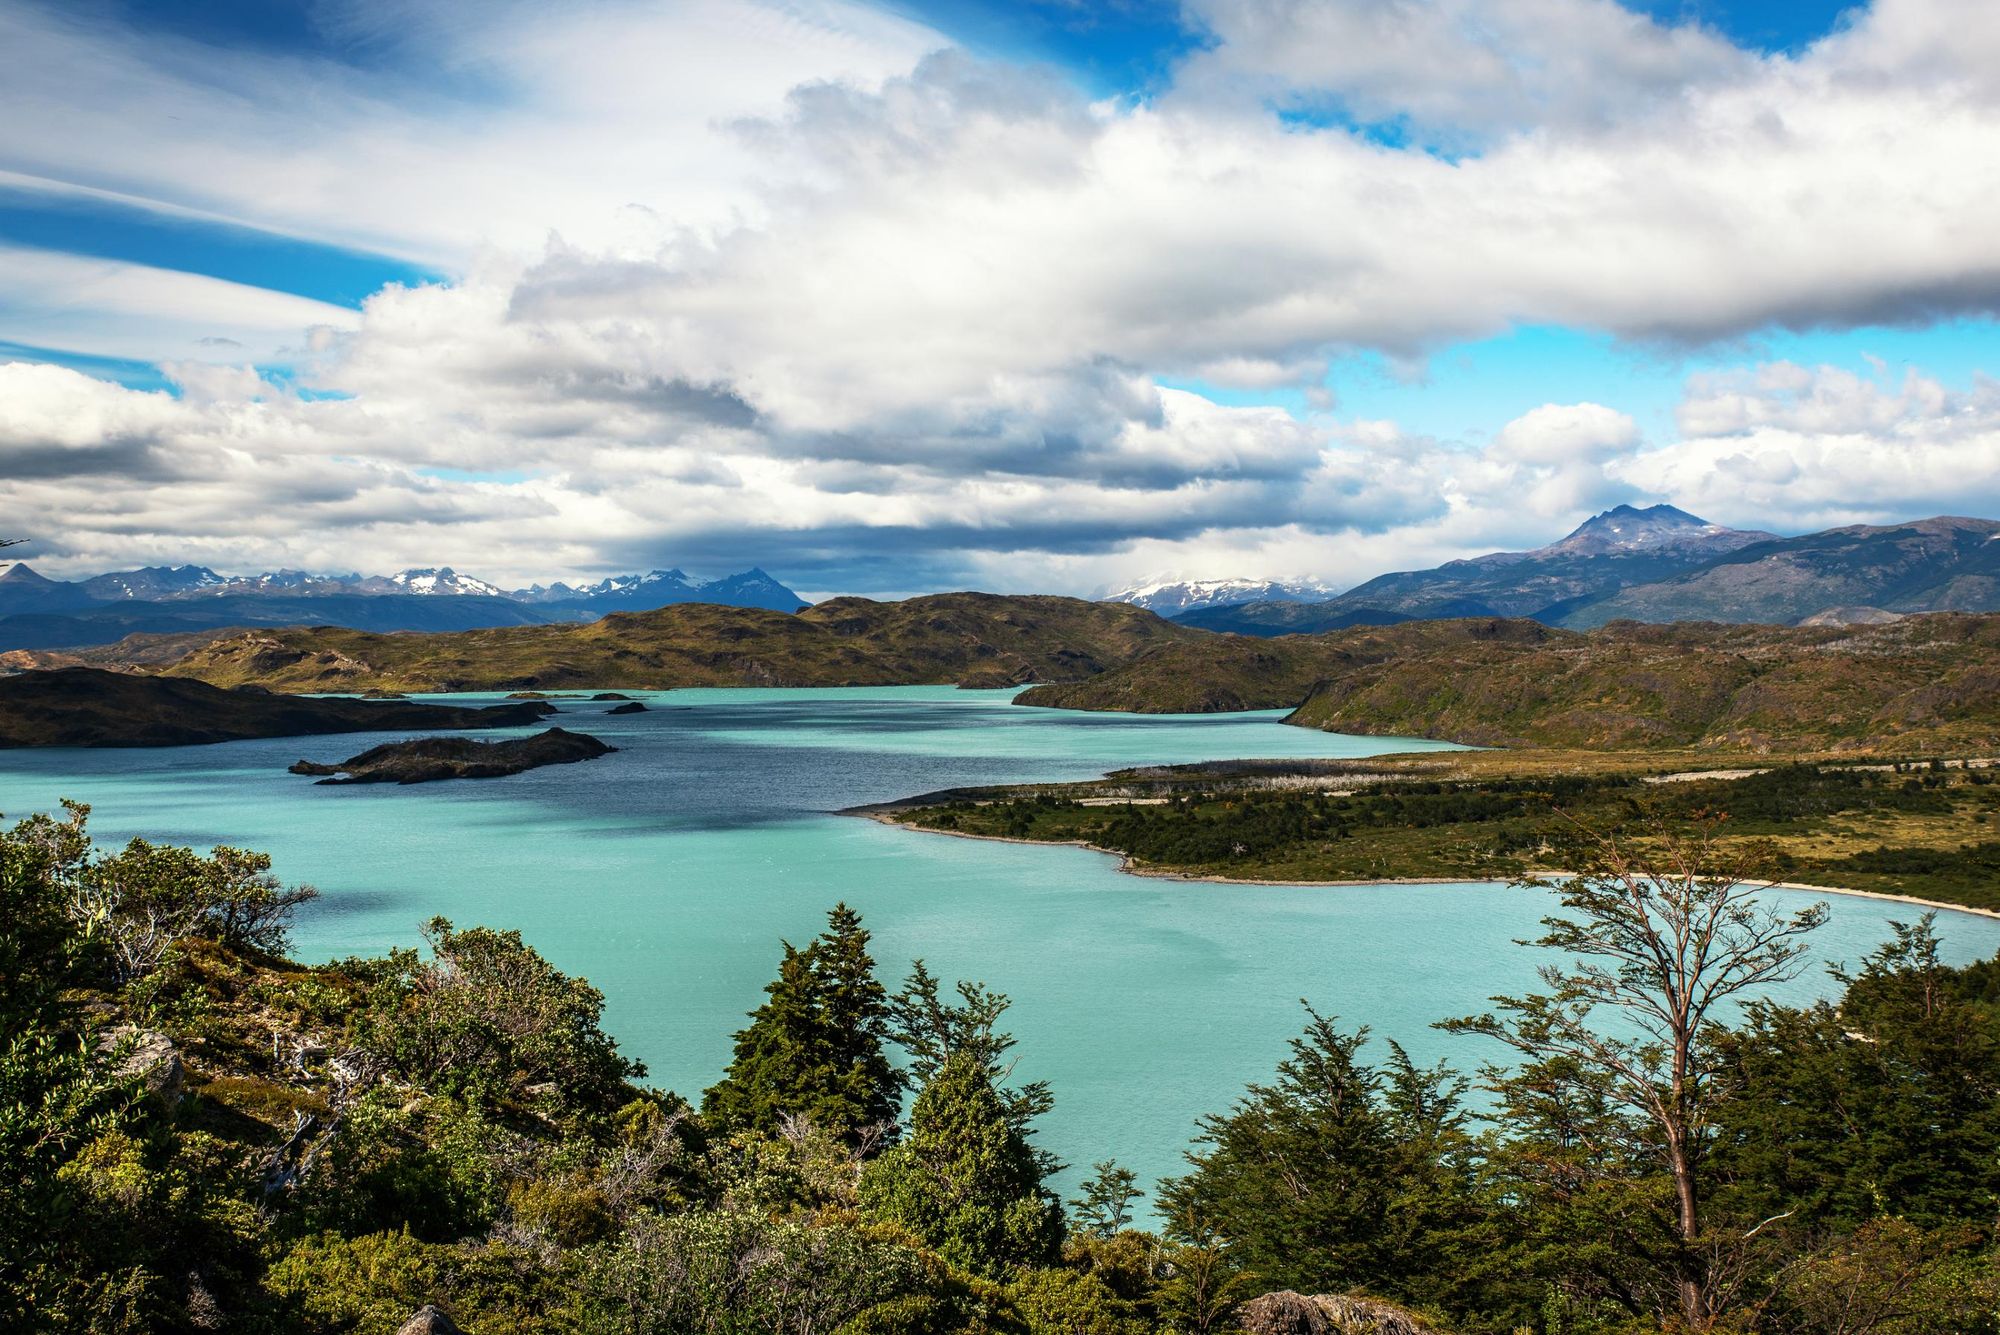 The blue water of Lake Nordenskjold from the W trek route in Torres del Paine in Patagonia, Chile. Photo: Getty